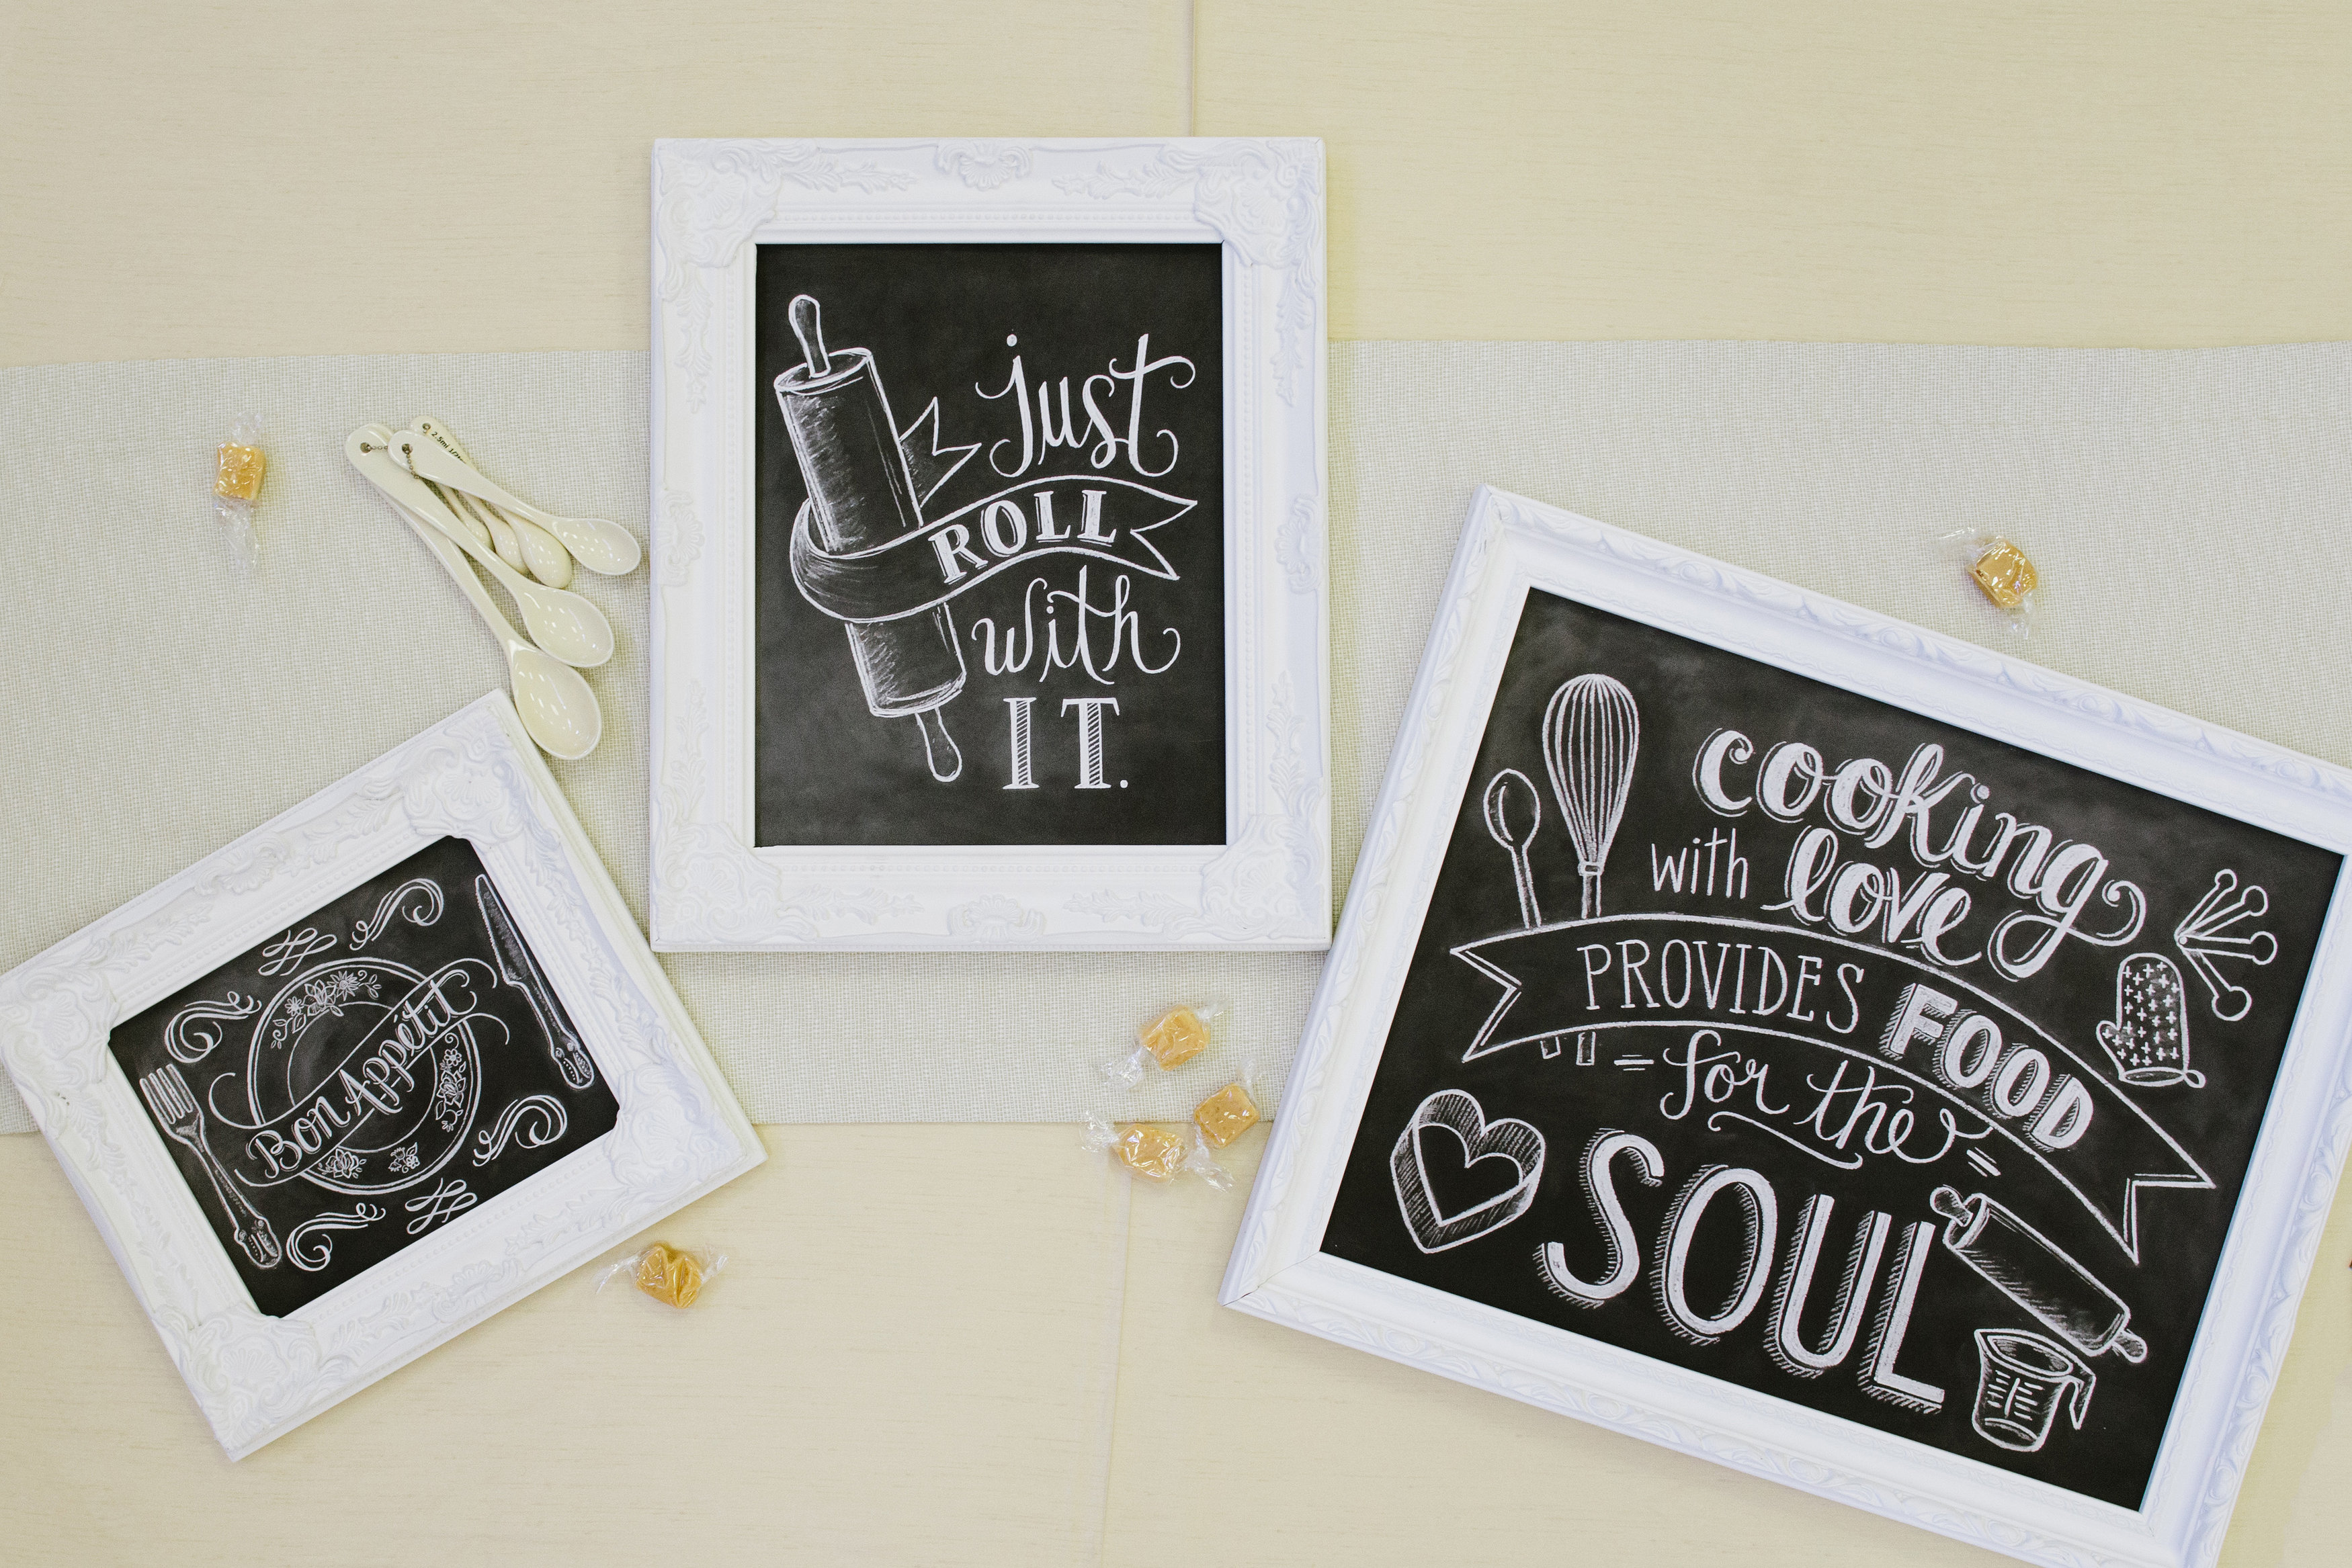 Cooking prints by Lily & Val. Cooking with love provides food for the soul.